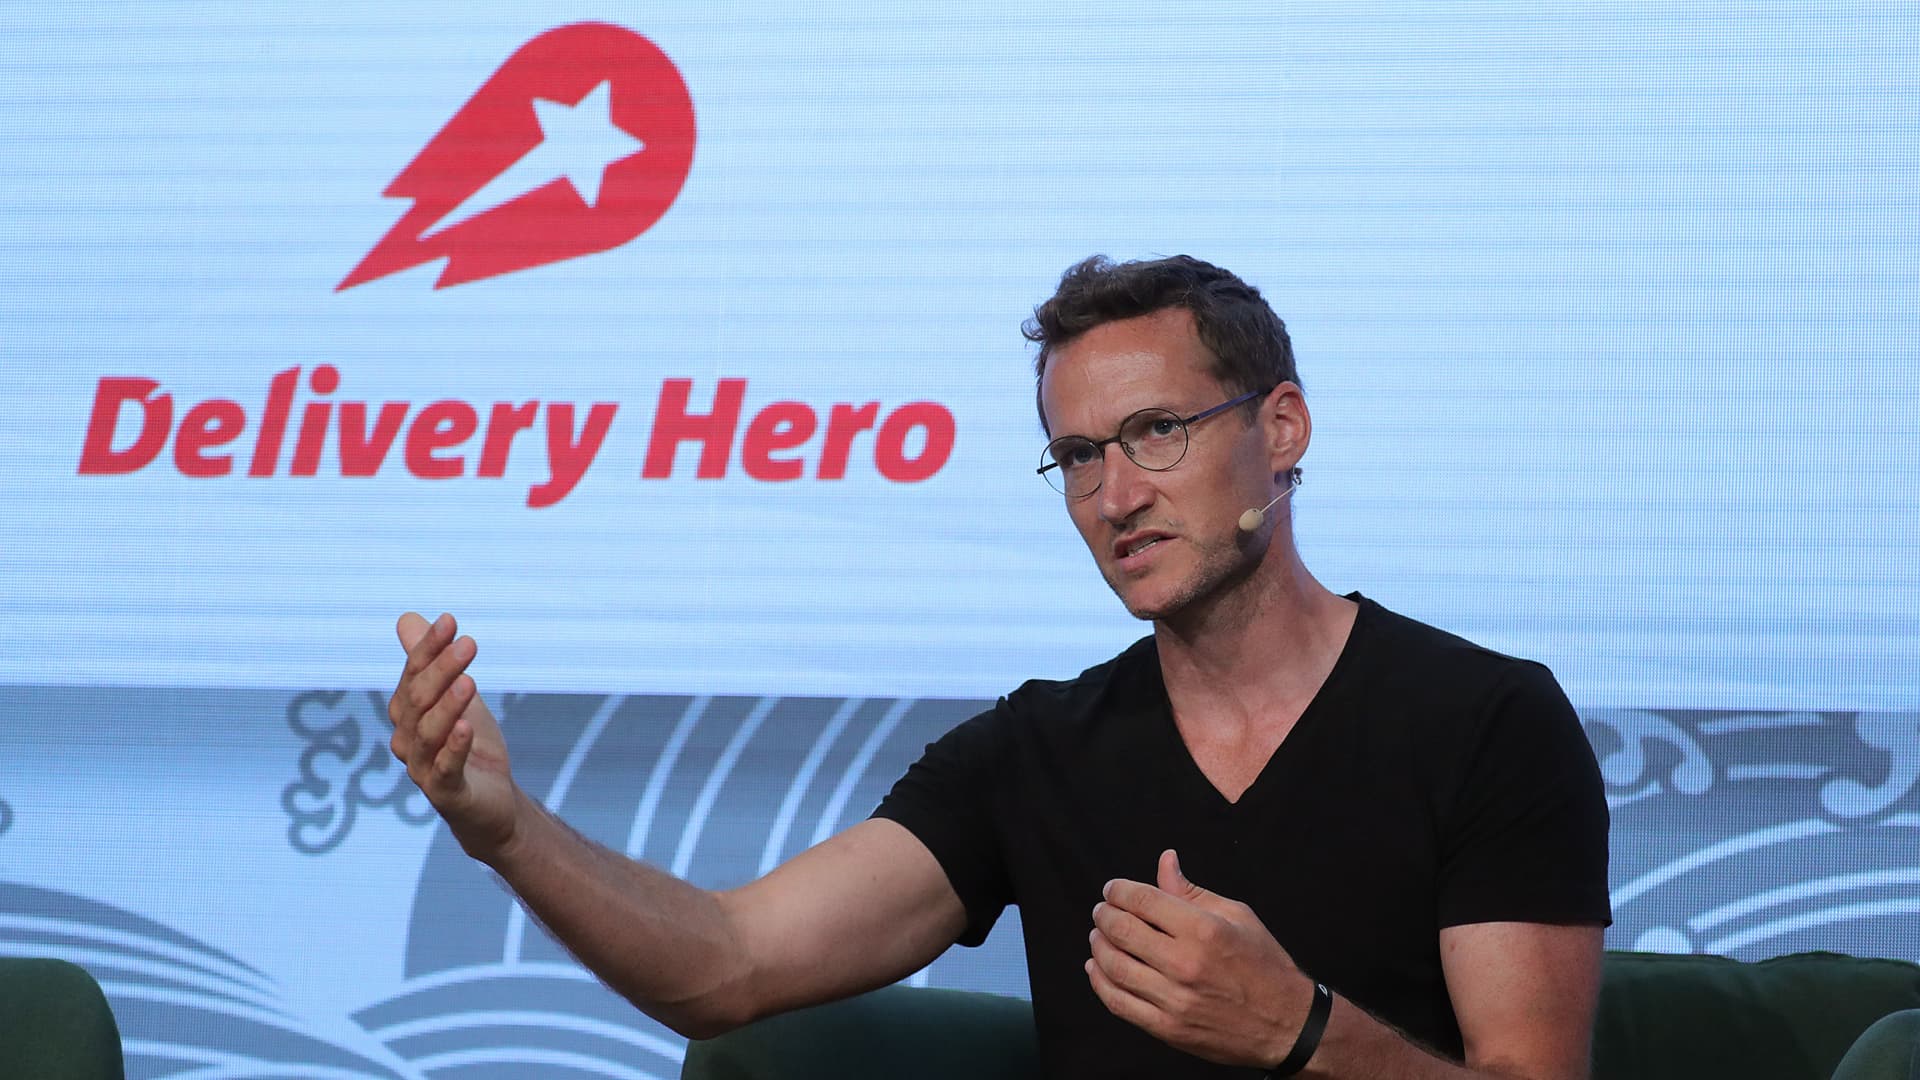 Delivery Hero CEO happy to keep Asia unit Foodpanda 'forever' after stock plunged on sale outlook